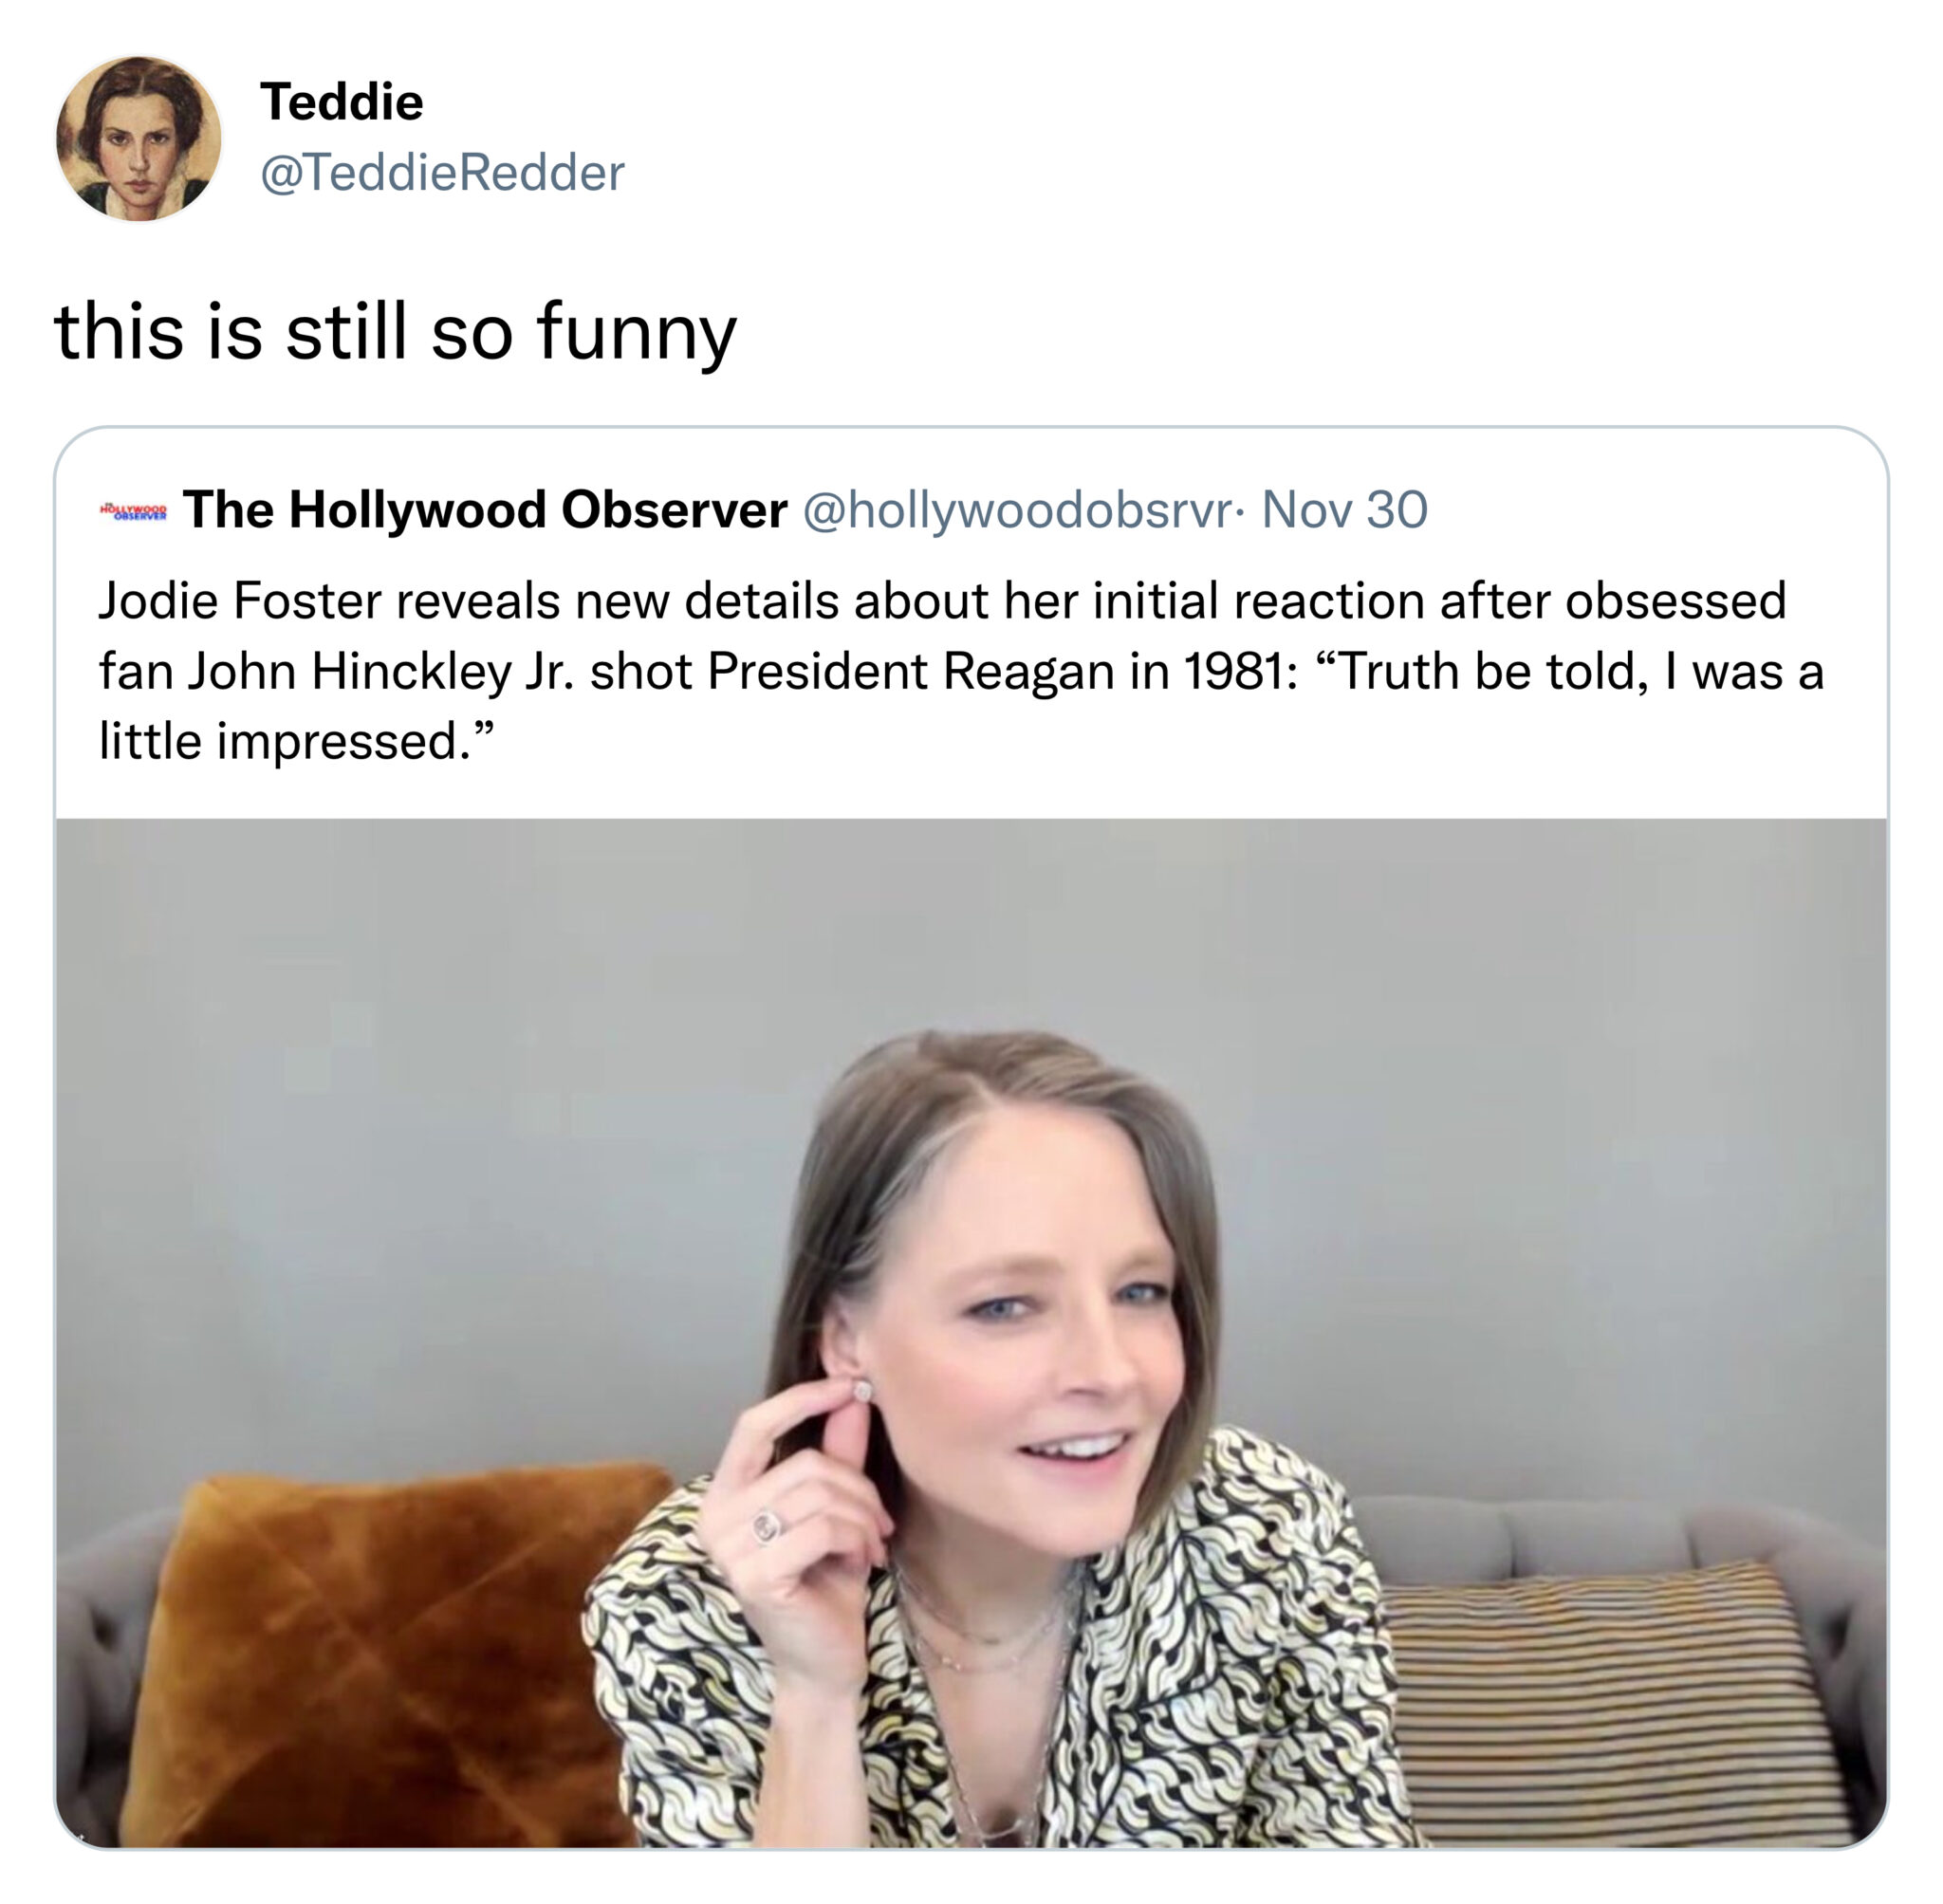 funny tweets - Teddie Redder this is still so funny The Hollywood Observer . Nov 30 Jodie Foster reveals new details about her initial reaction after obsessed fan John Hinckley Jr. shot President Reagan in 1981 "Truth be told, I was a little impressed."